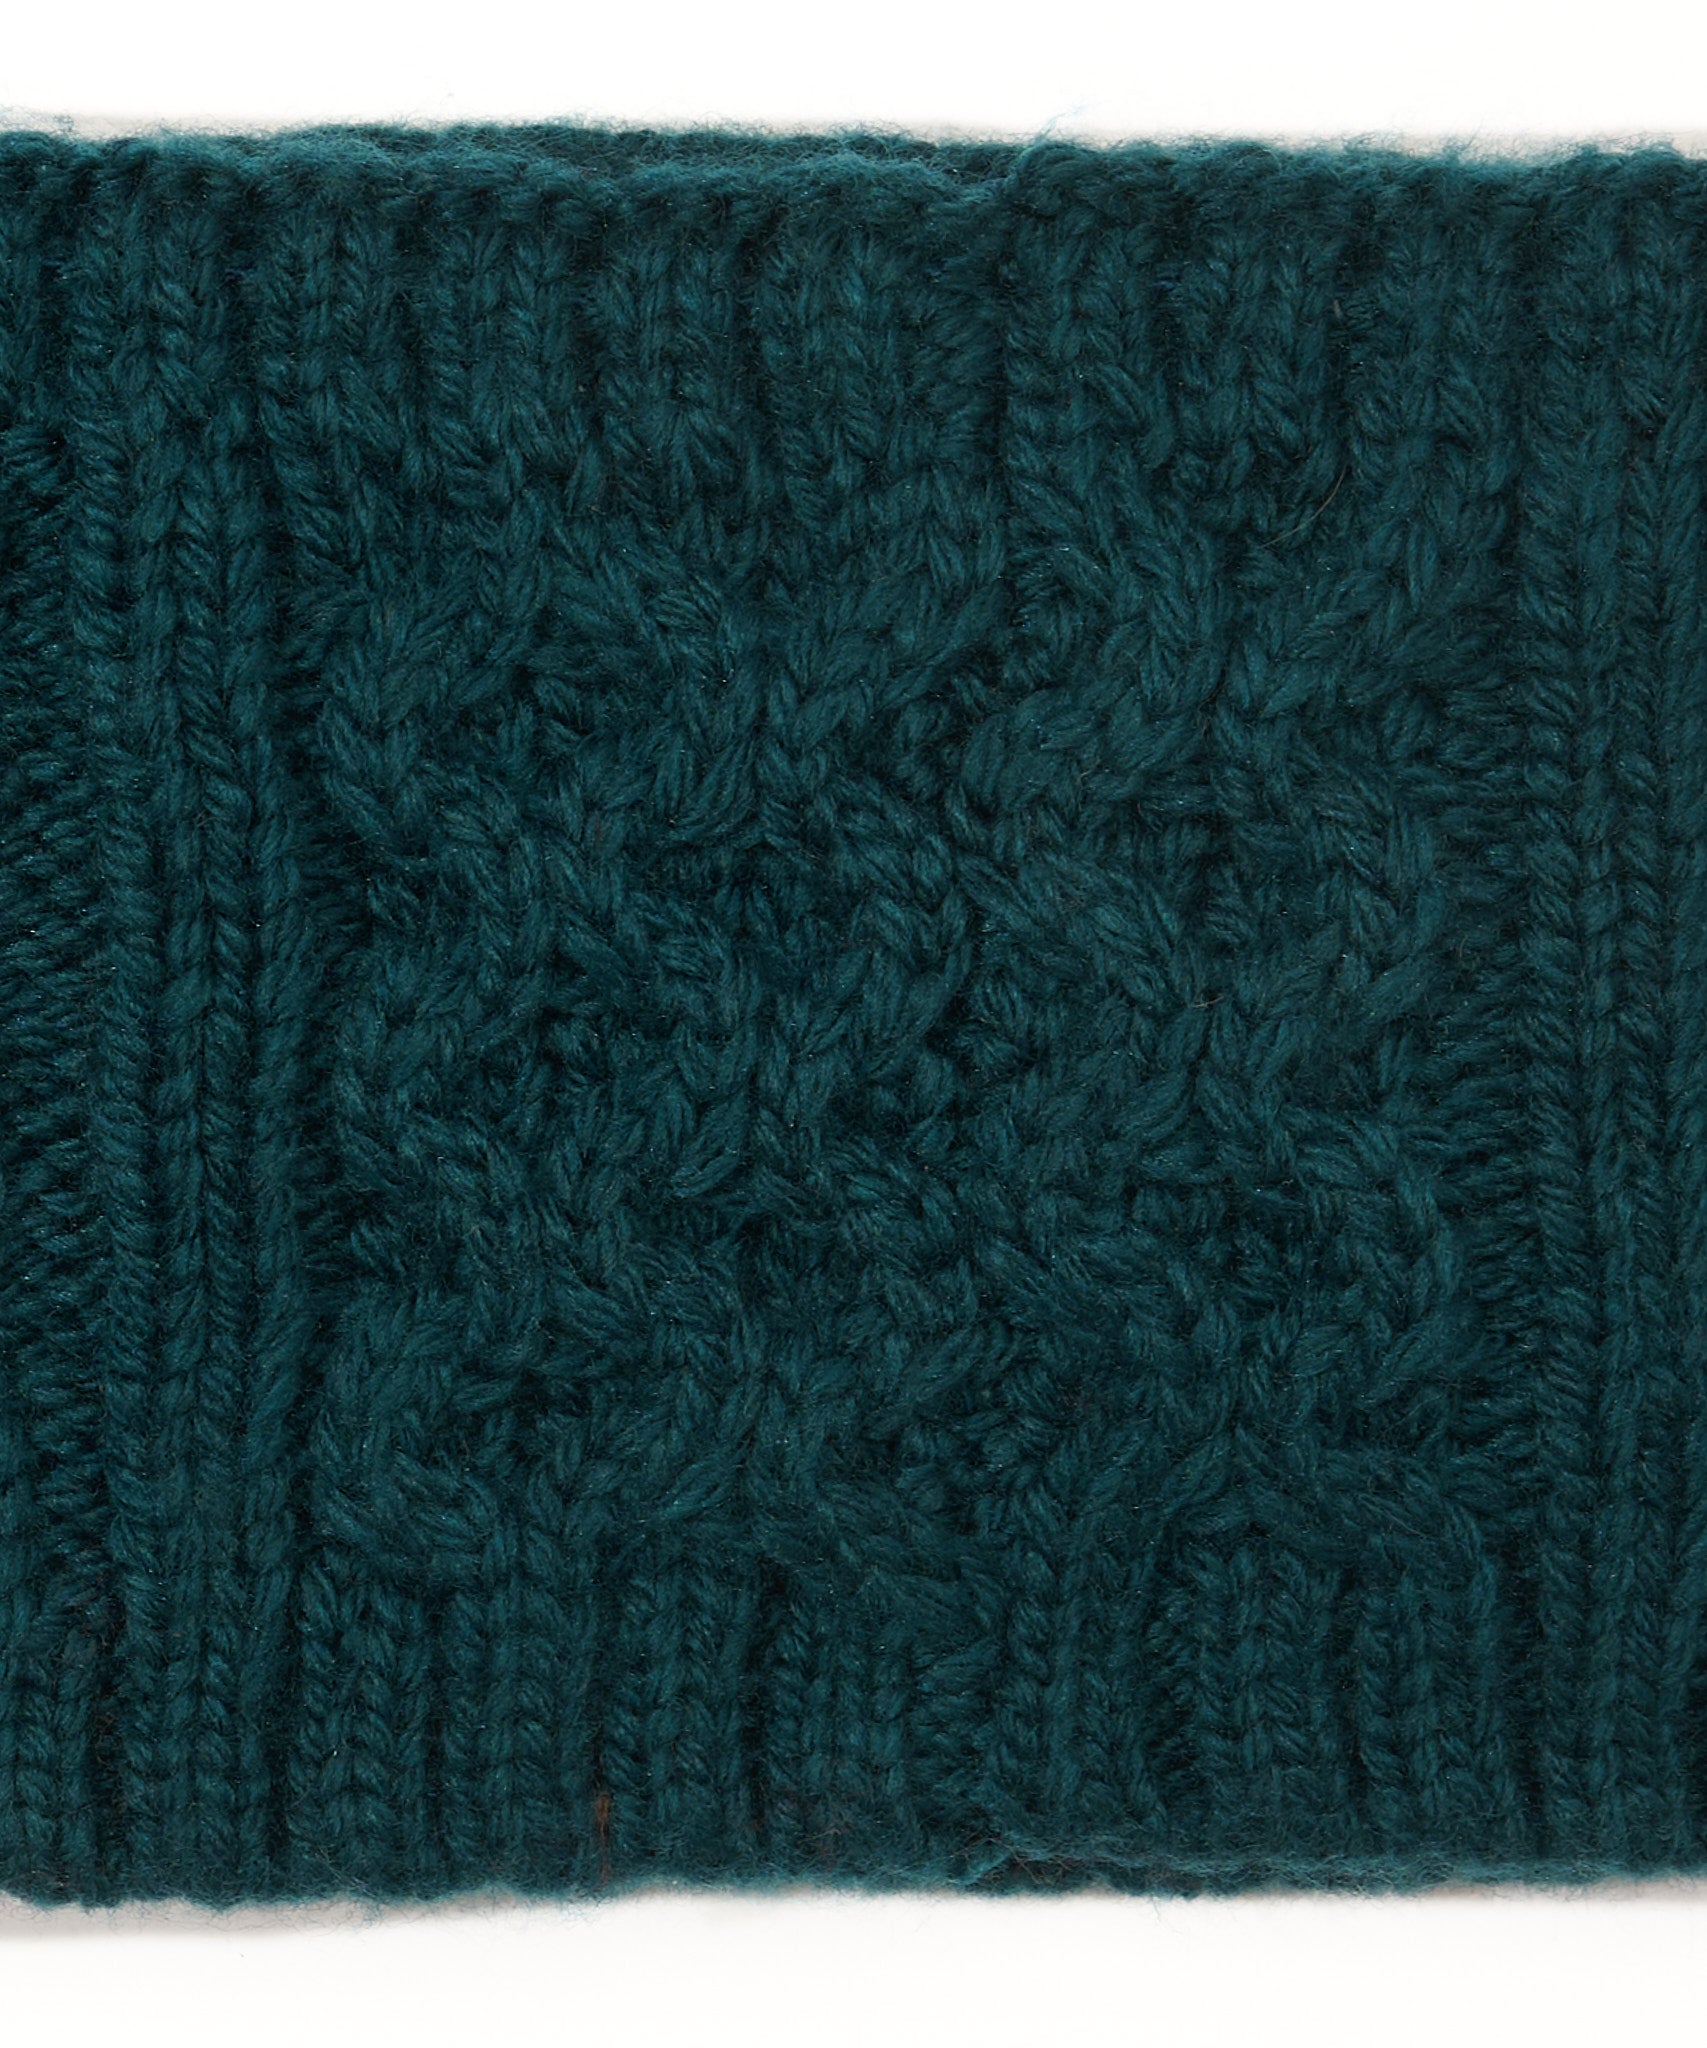 Recycled Wishbone Cable Headband in color Deep Teal